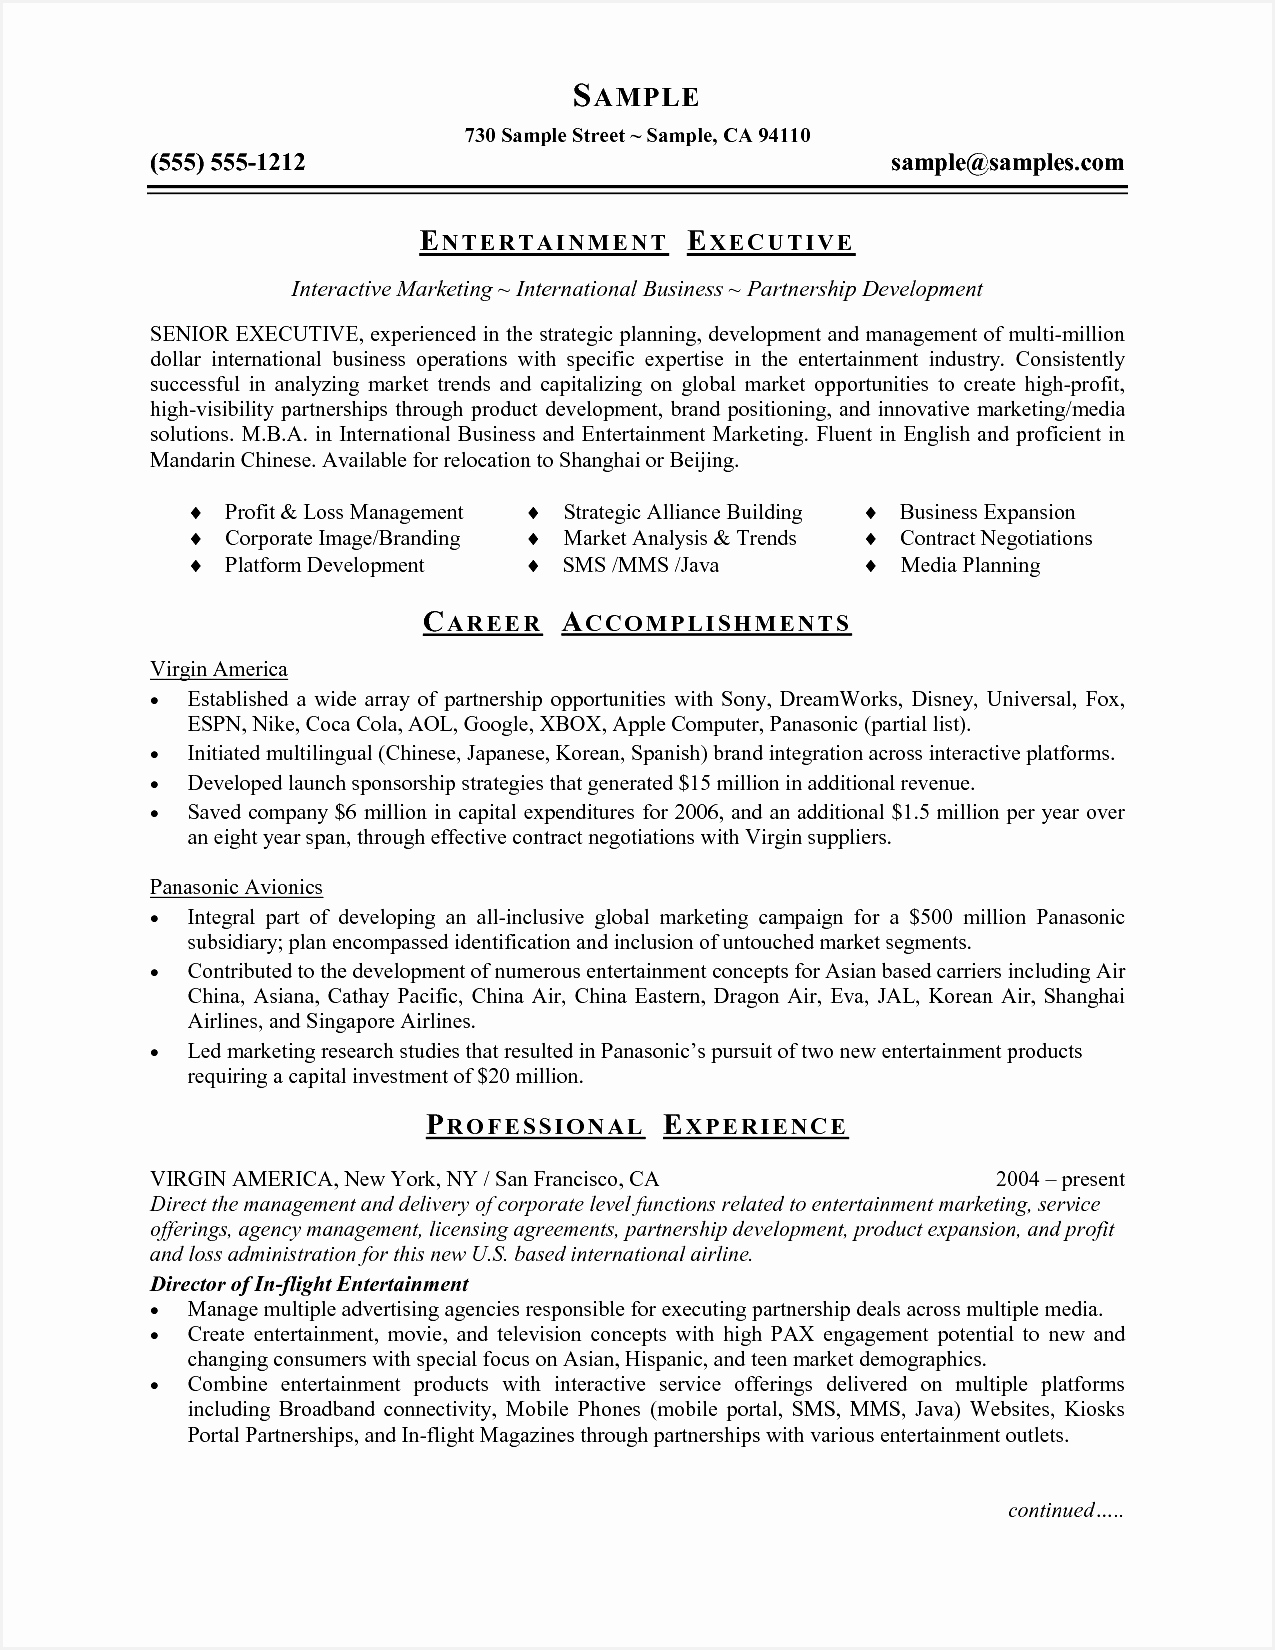 free resume template word fresh free professional resume template s luxury od specialist16501275